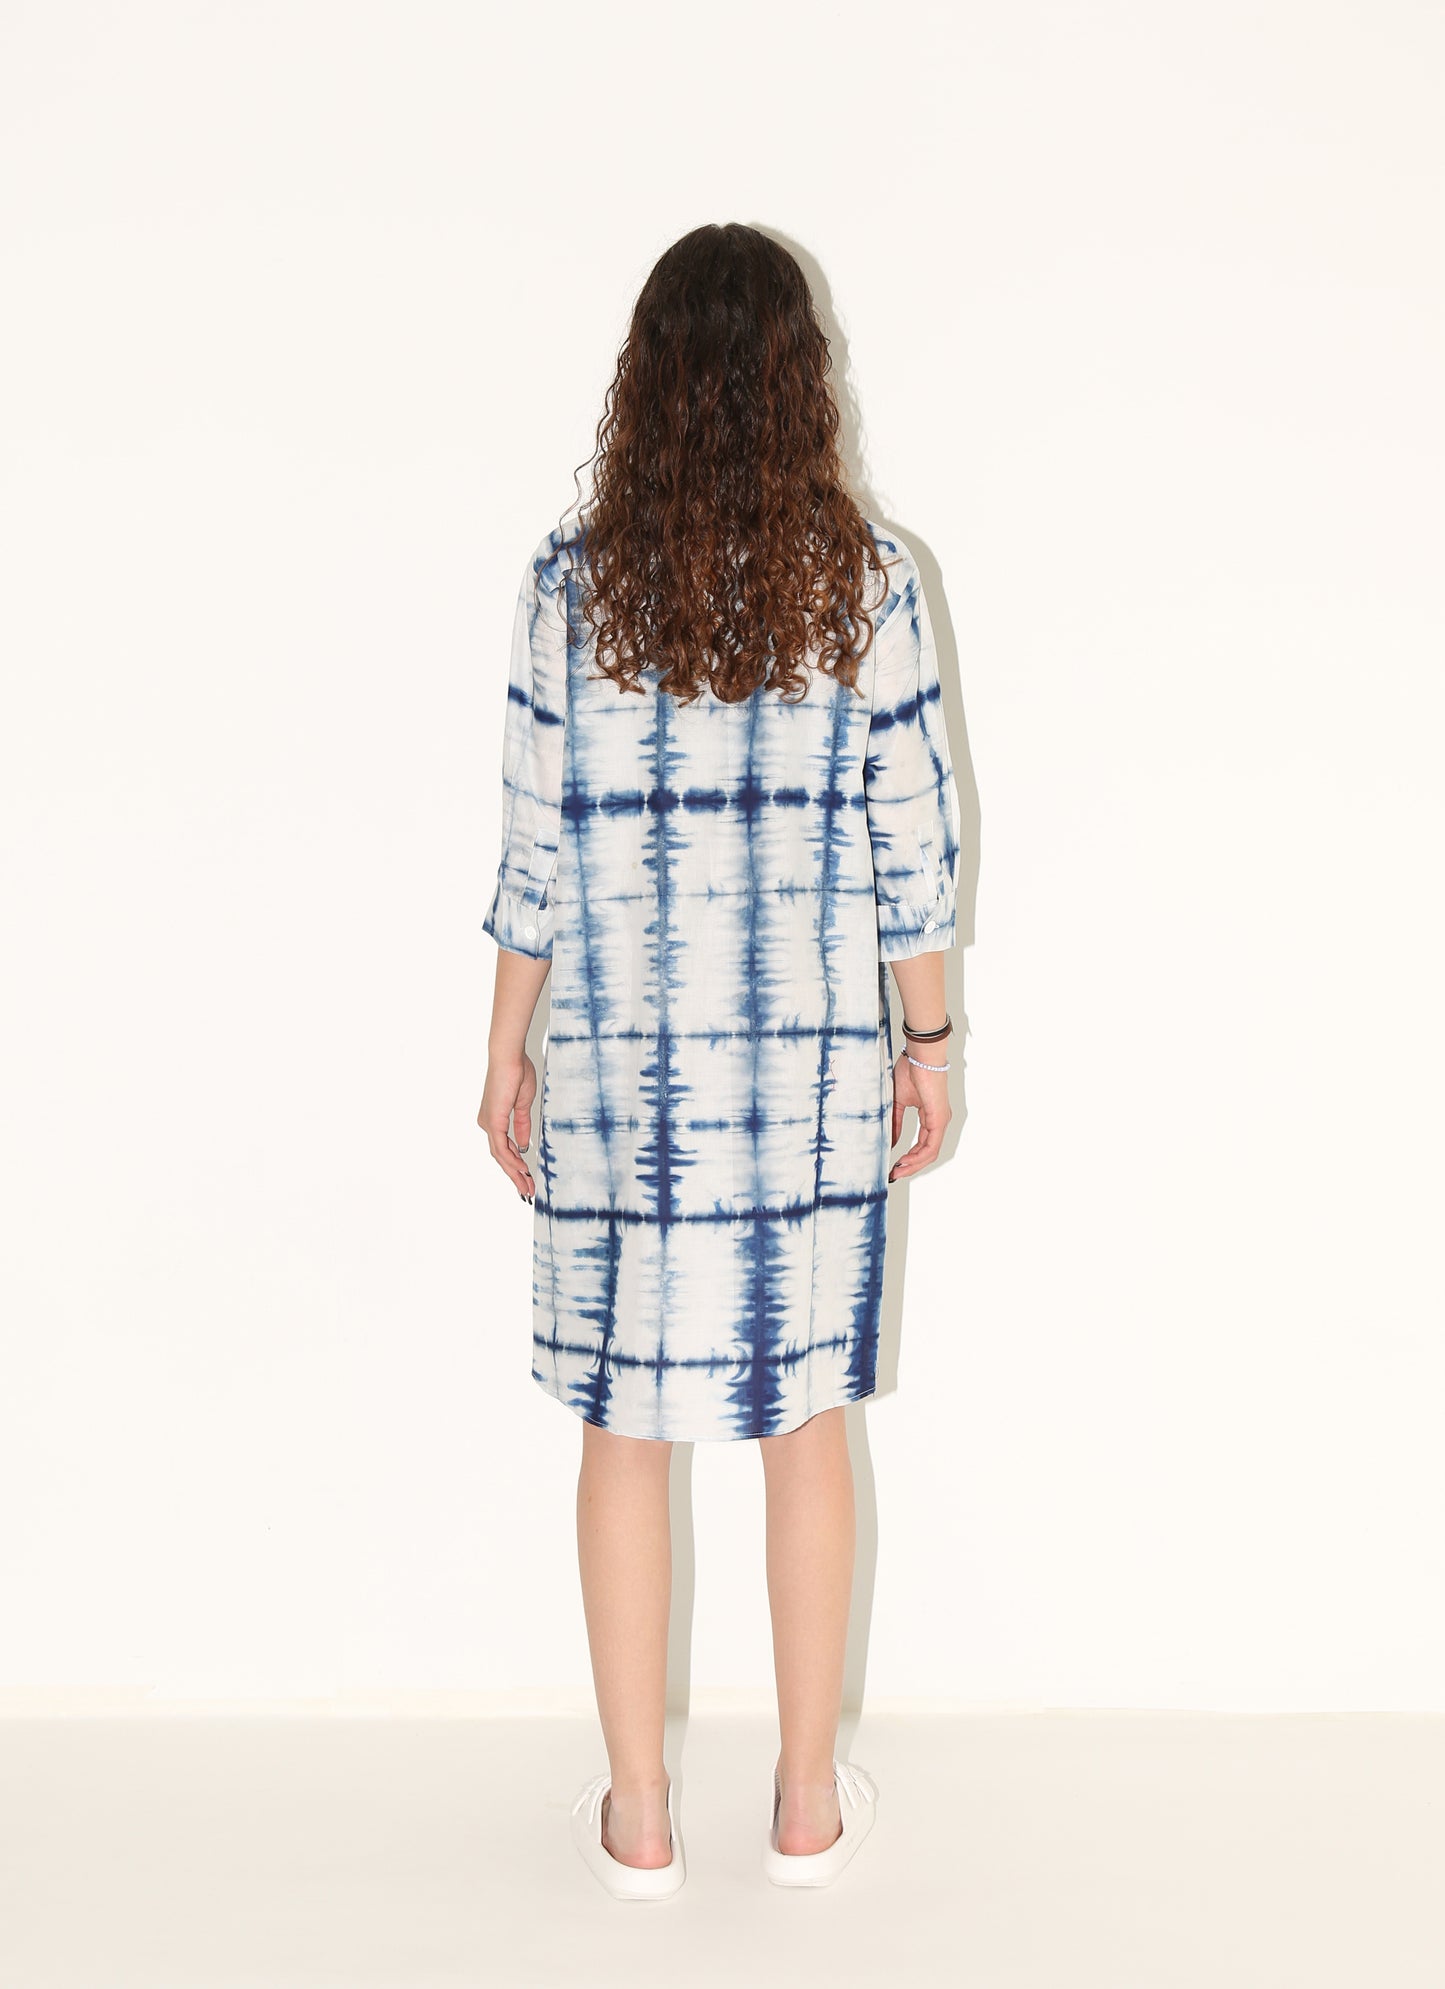 ZOLA Dress / Clamp dyed